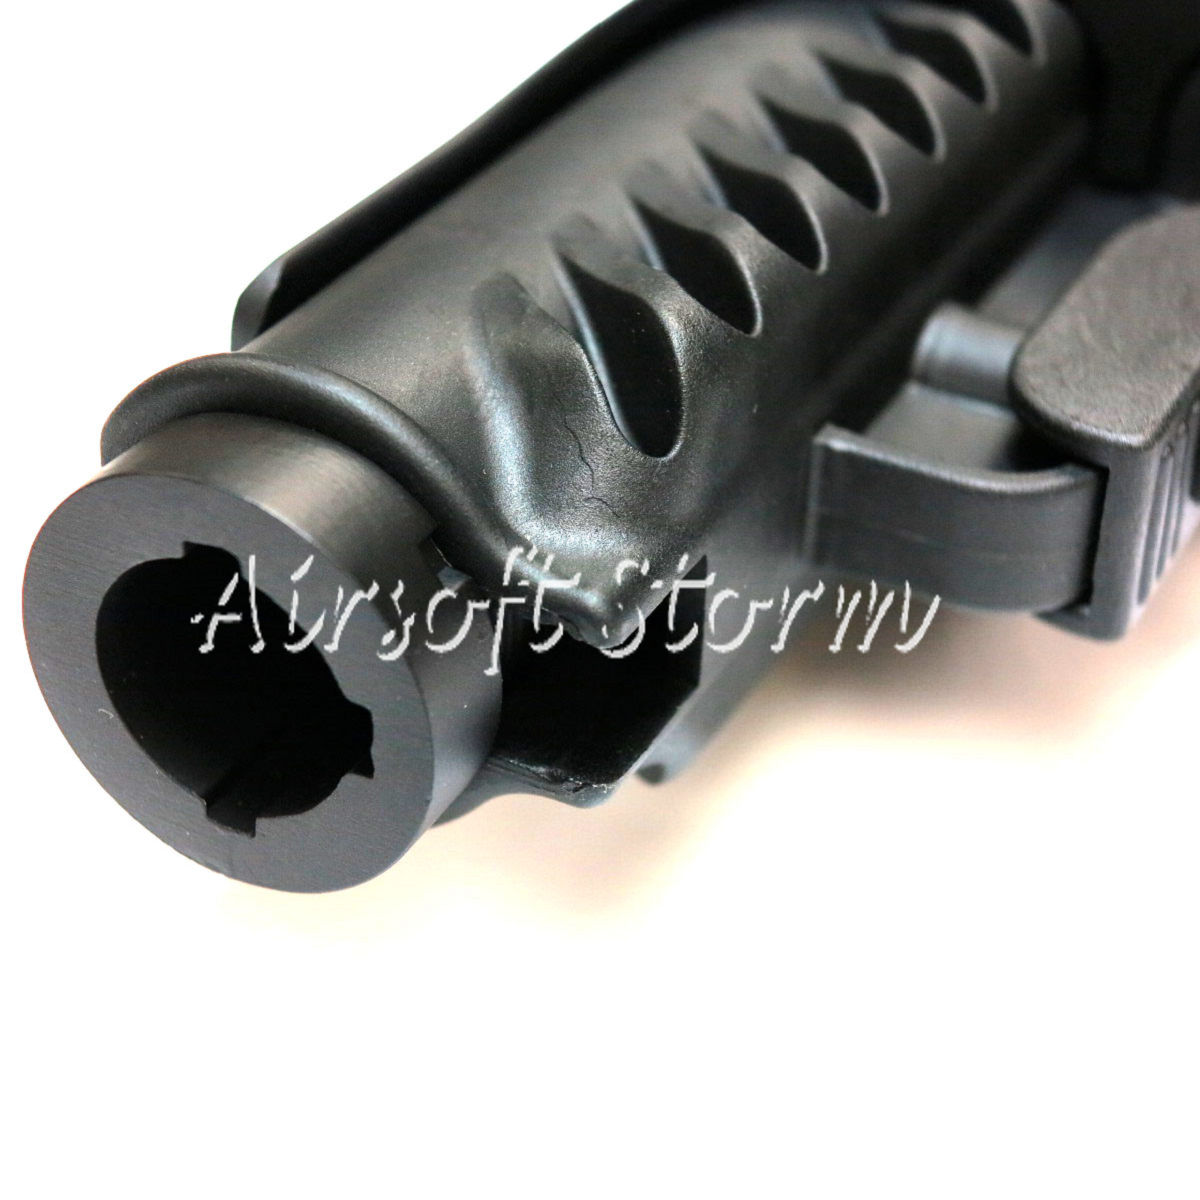 Airsoft Tactical Gear APS M4A64 Shark Style M4 Stock with Cheek Piece Set Black